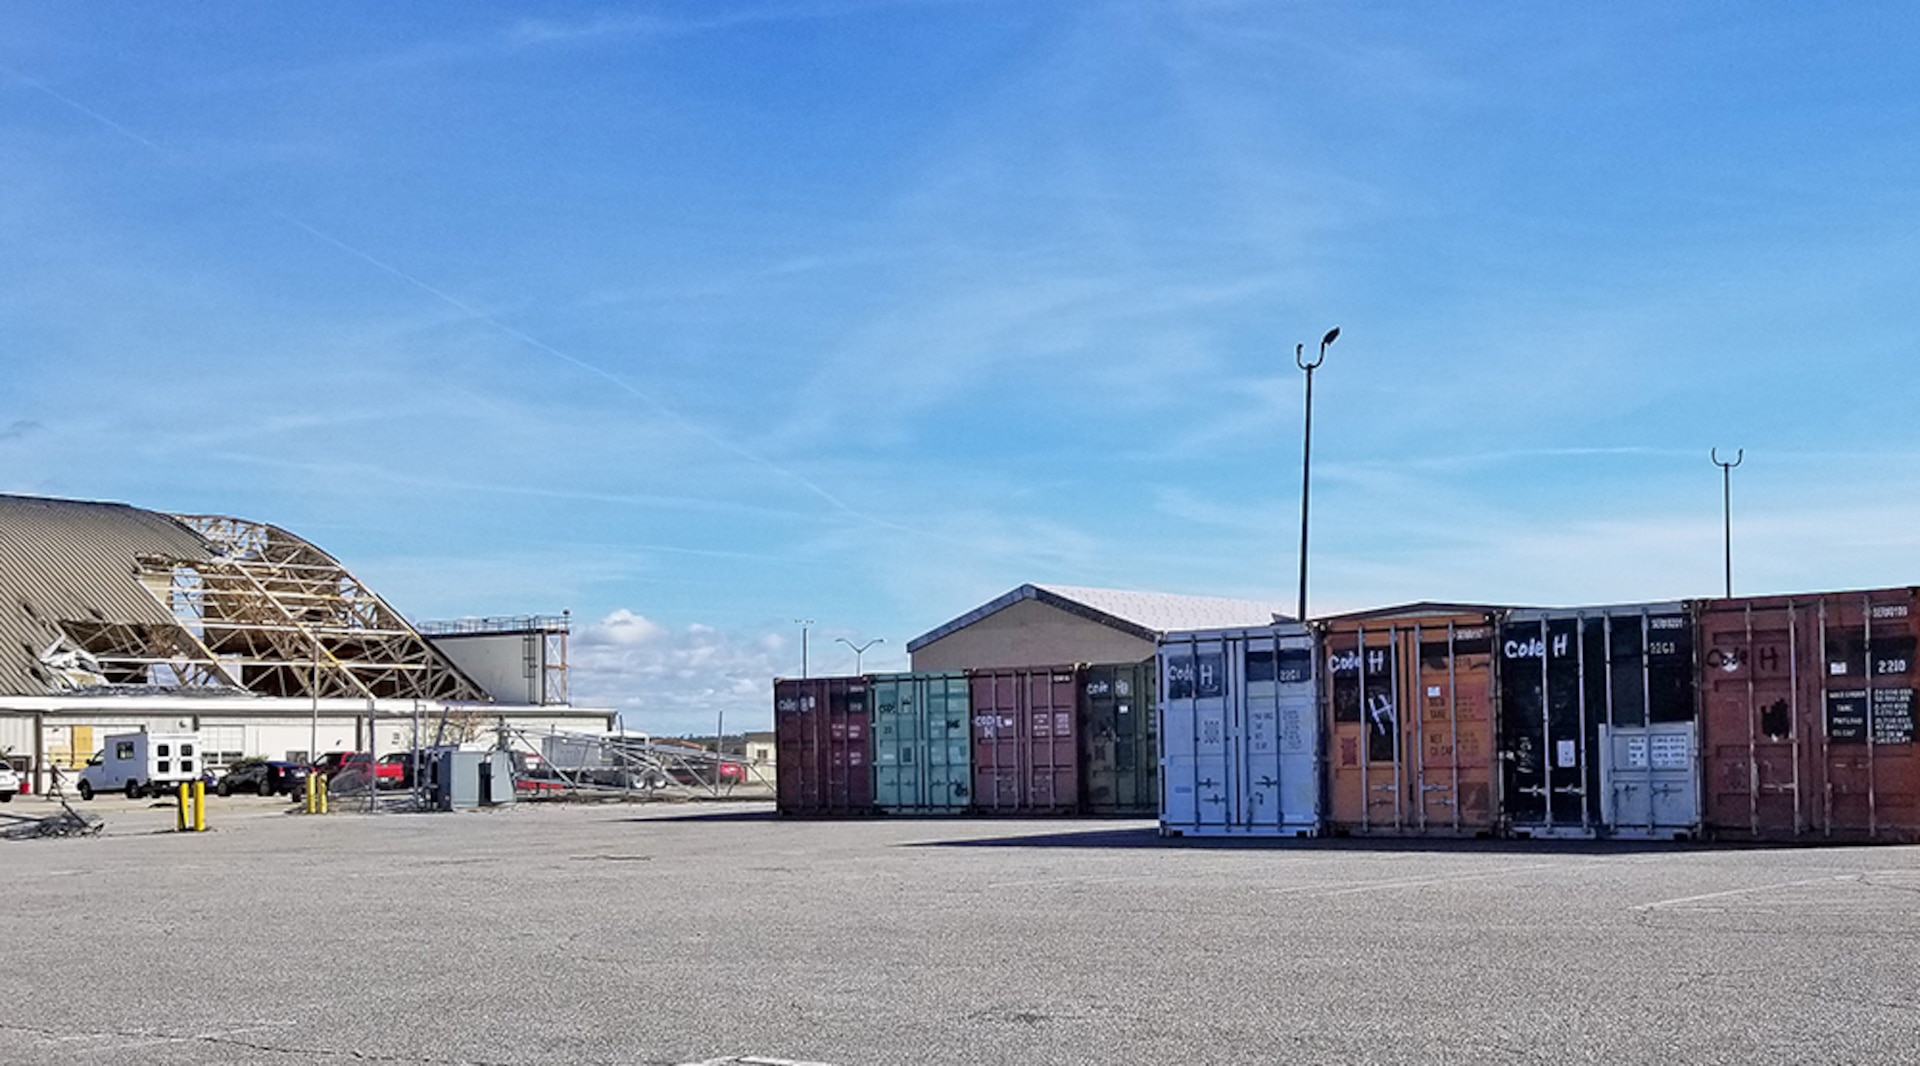 Excess shipping containers supplied from DLA Disposition Services line the parking lot of a damaged hangar facility at Tyndall AFB.